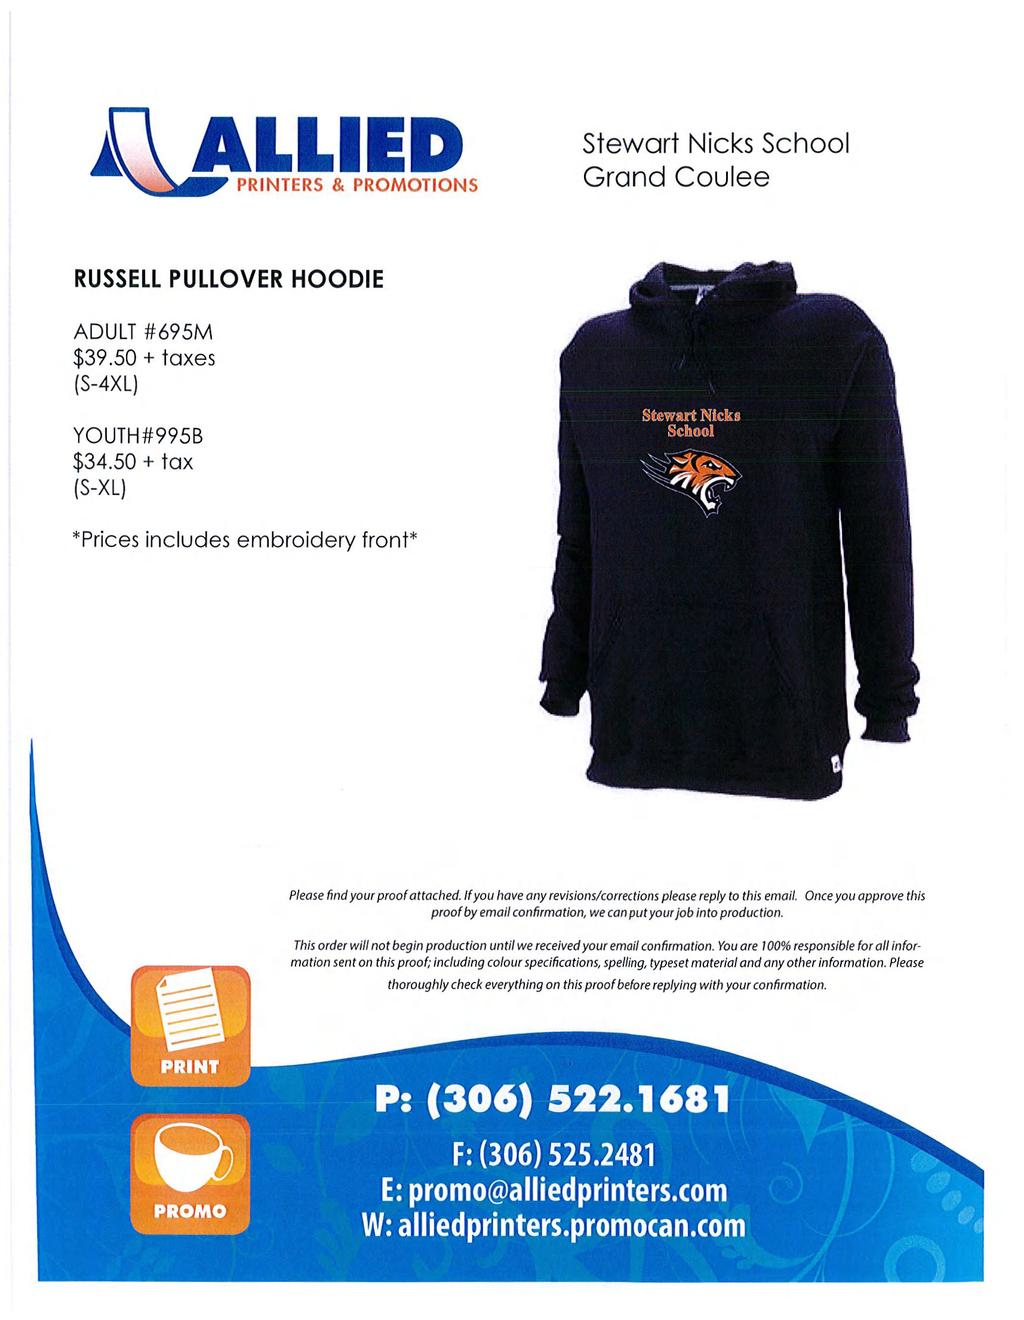 ia ALLIED PRINTERS & PROMOTIONS RUSSELL PULLOVER HOODIE ADULT #695M $39.